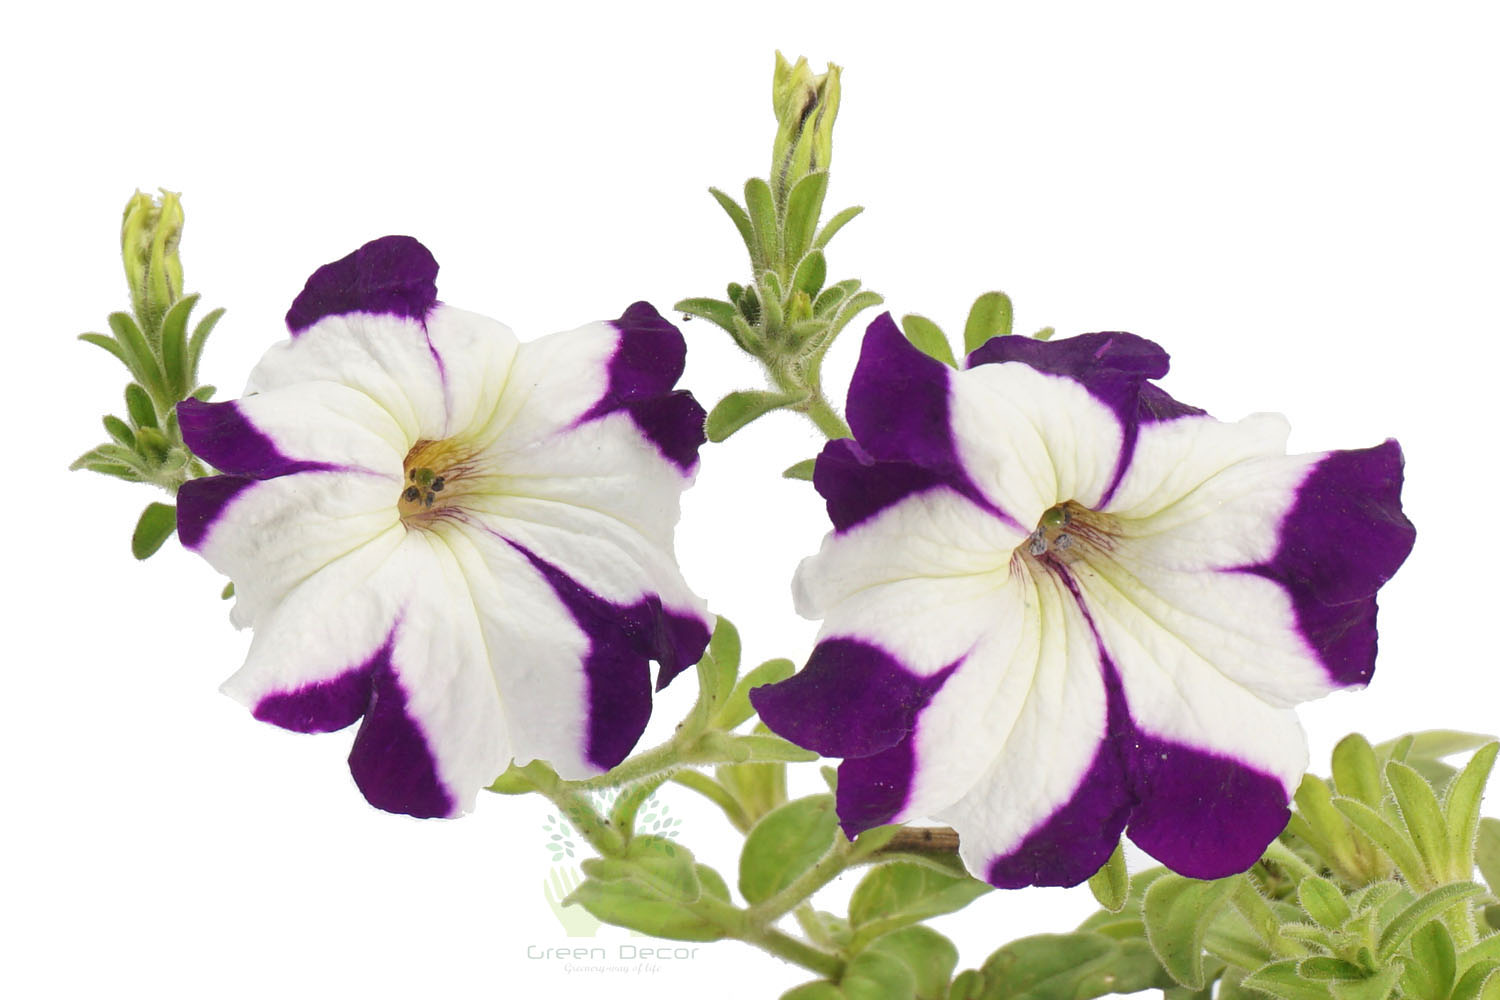 Buy Petunia Voilet closeup View , White Pots and seeds in Delhi NCR by the best online nursery shop Greendecor.